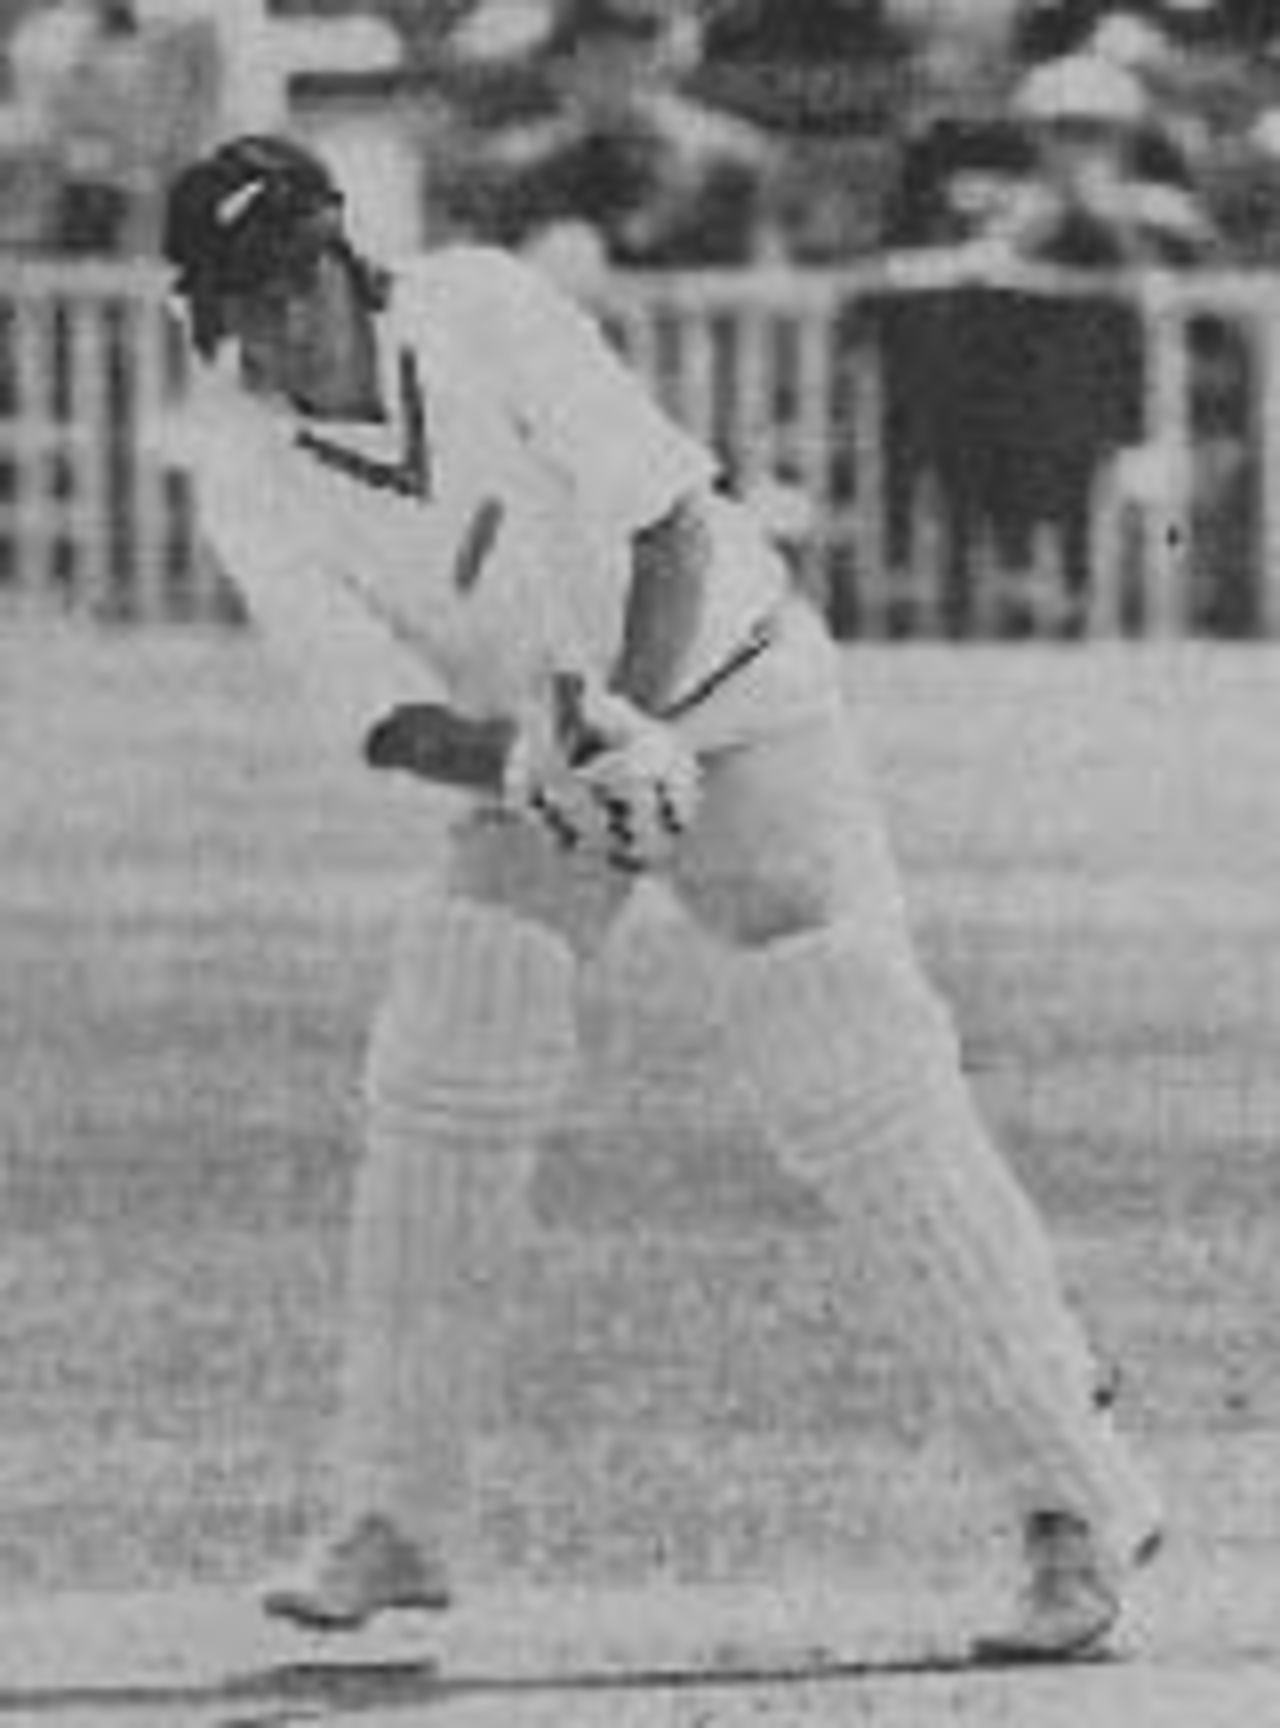 Glenn Turner batting for New Zealand against Worcestershire, May 1973, In this match he completed 1000 runs before the end of May